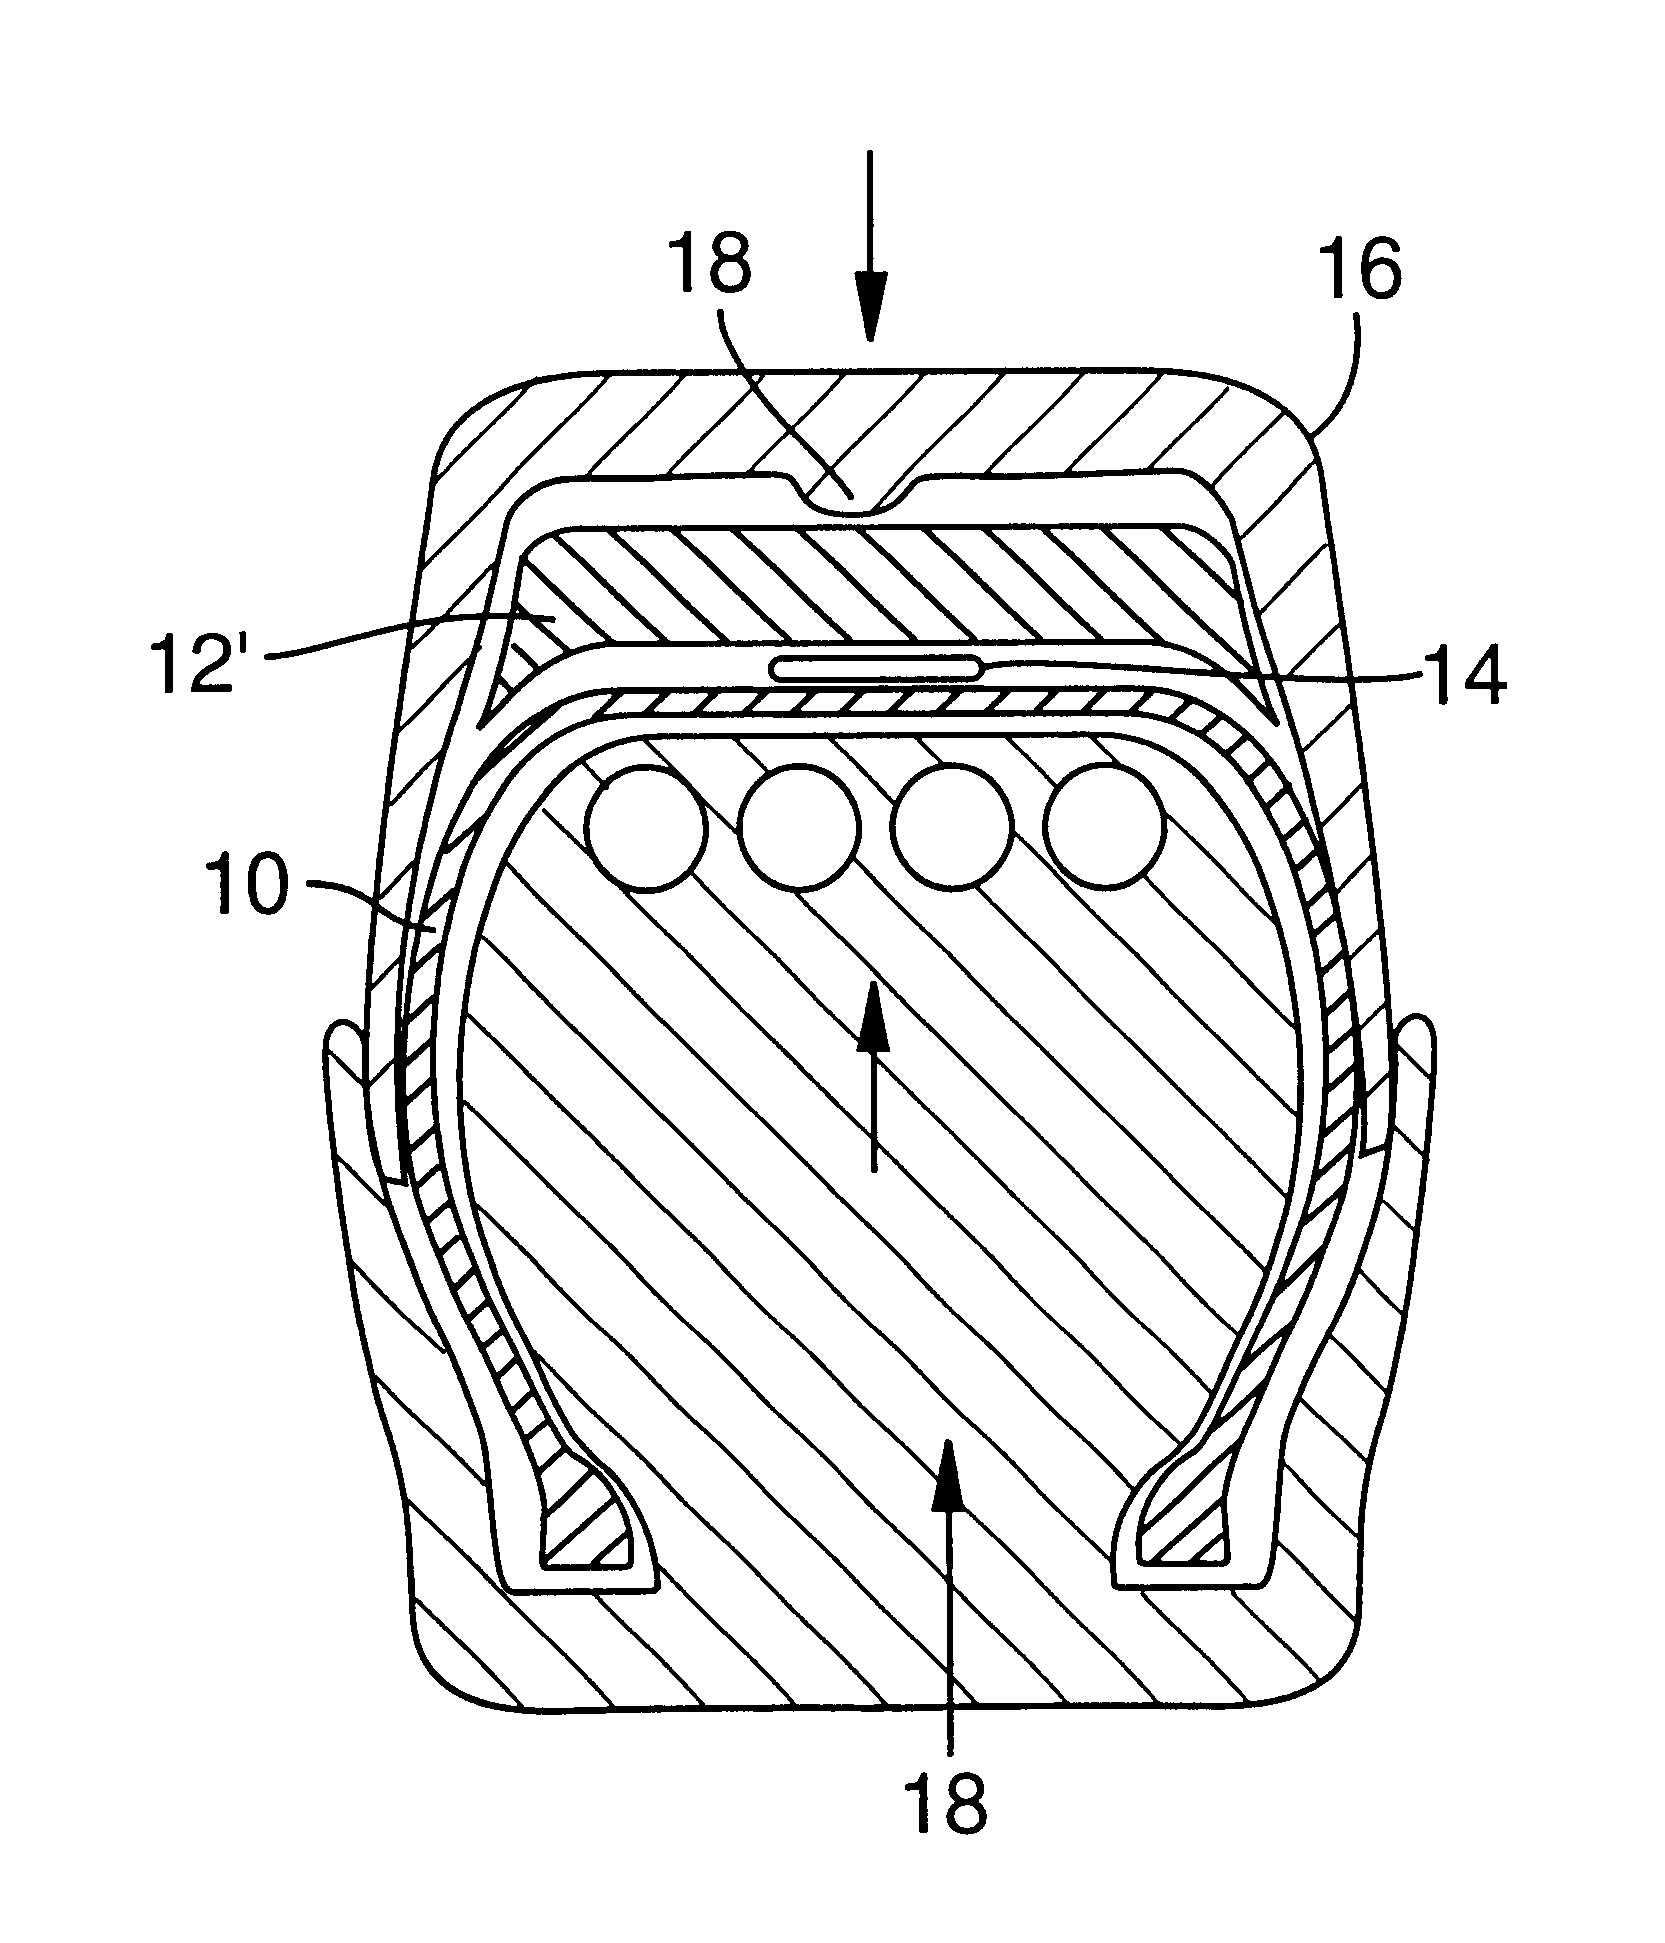 Process for creating expandable tire chamber